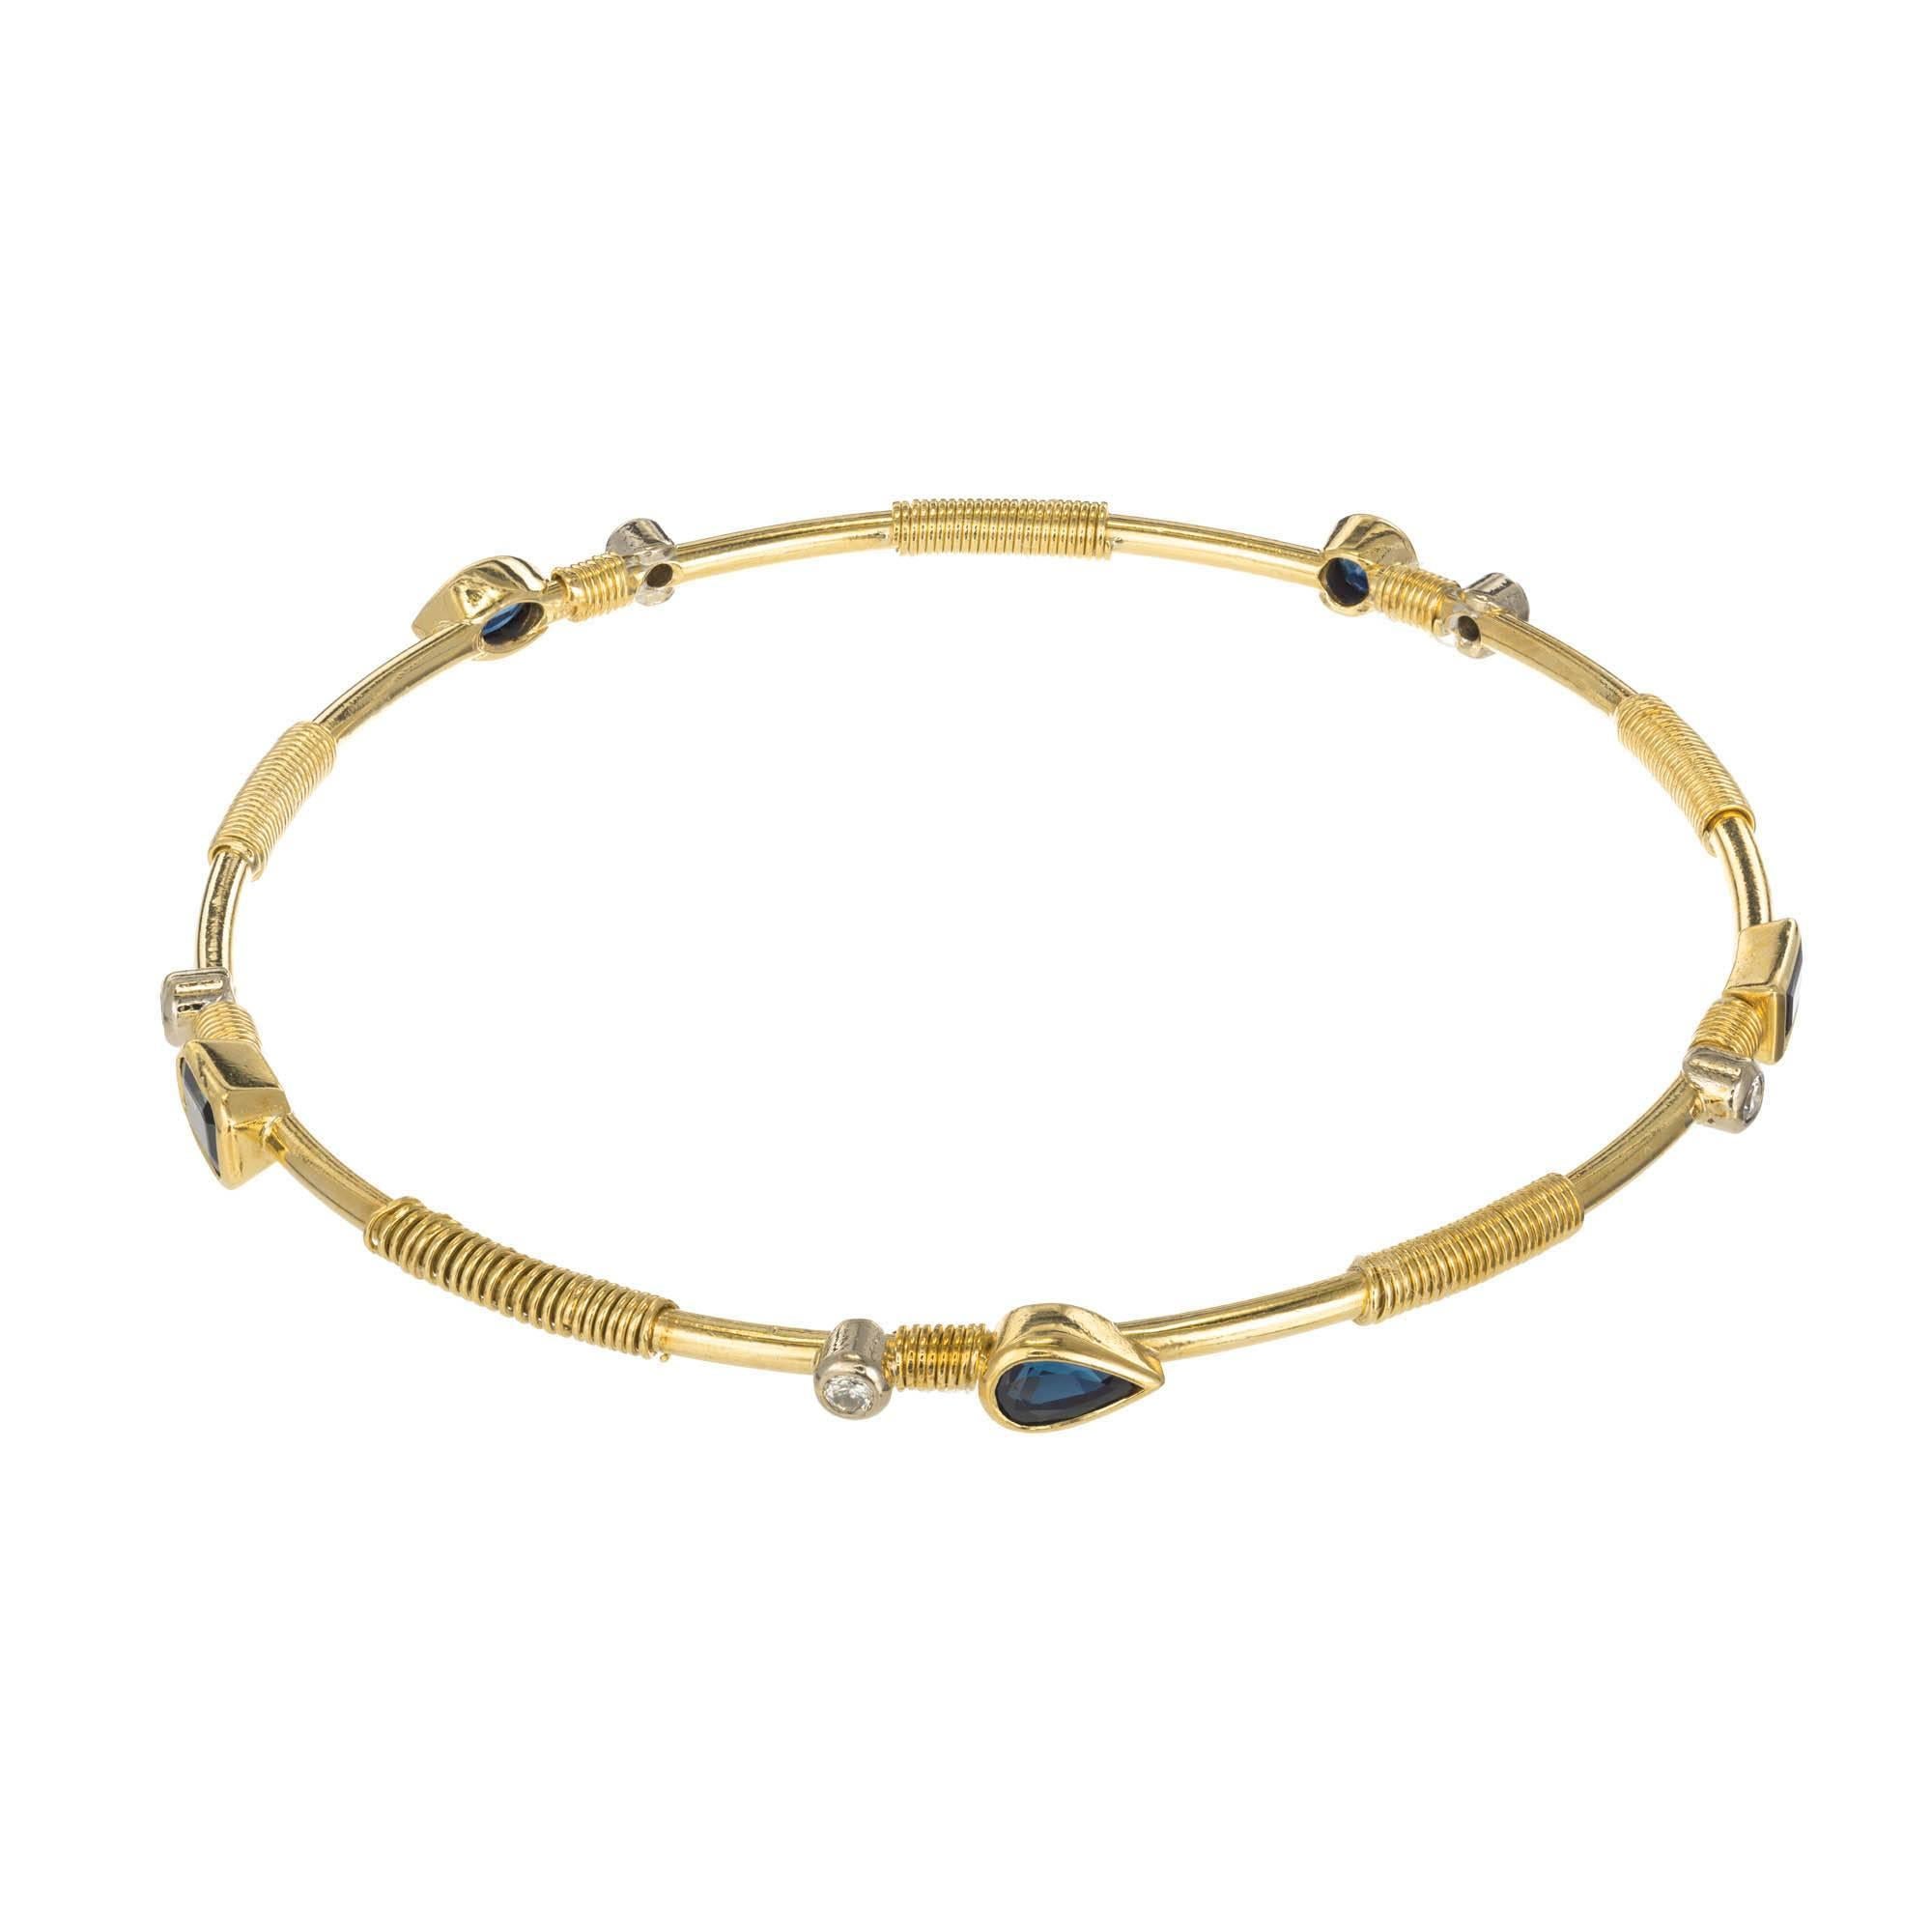 22k yellow gold bangle set with bezeled sapphires varying shapes and round diamonds with a coil wire design between stones.

1 round sapphire 3.5 x 2.2 mm Approximate .18 carats
1 marquise sapphire 5.0 x 4.0 x 2.9 Approximate .54 carats
1 pear